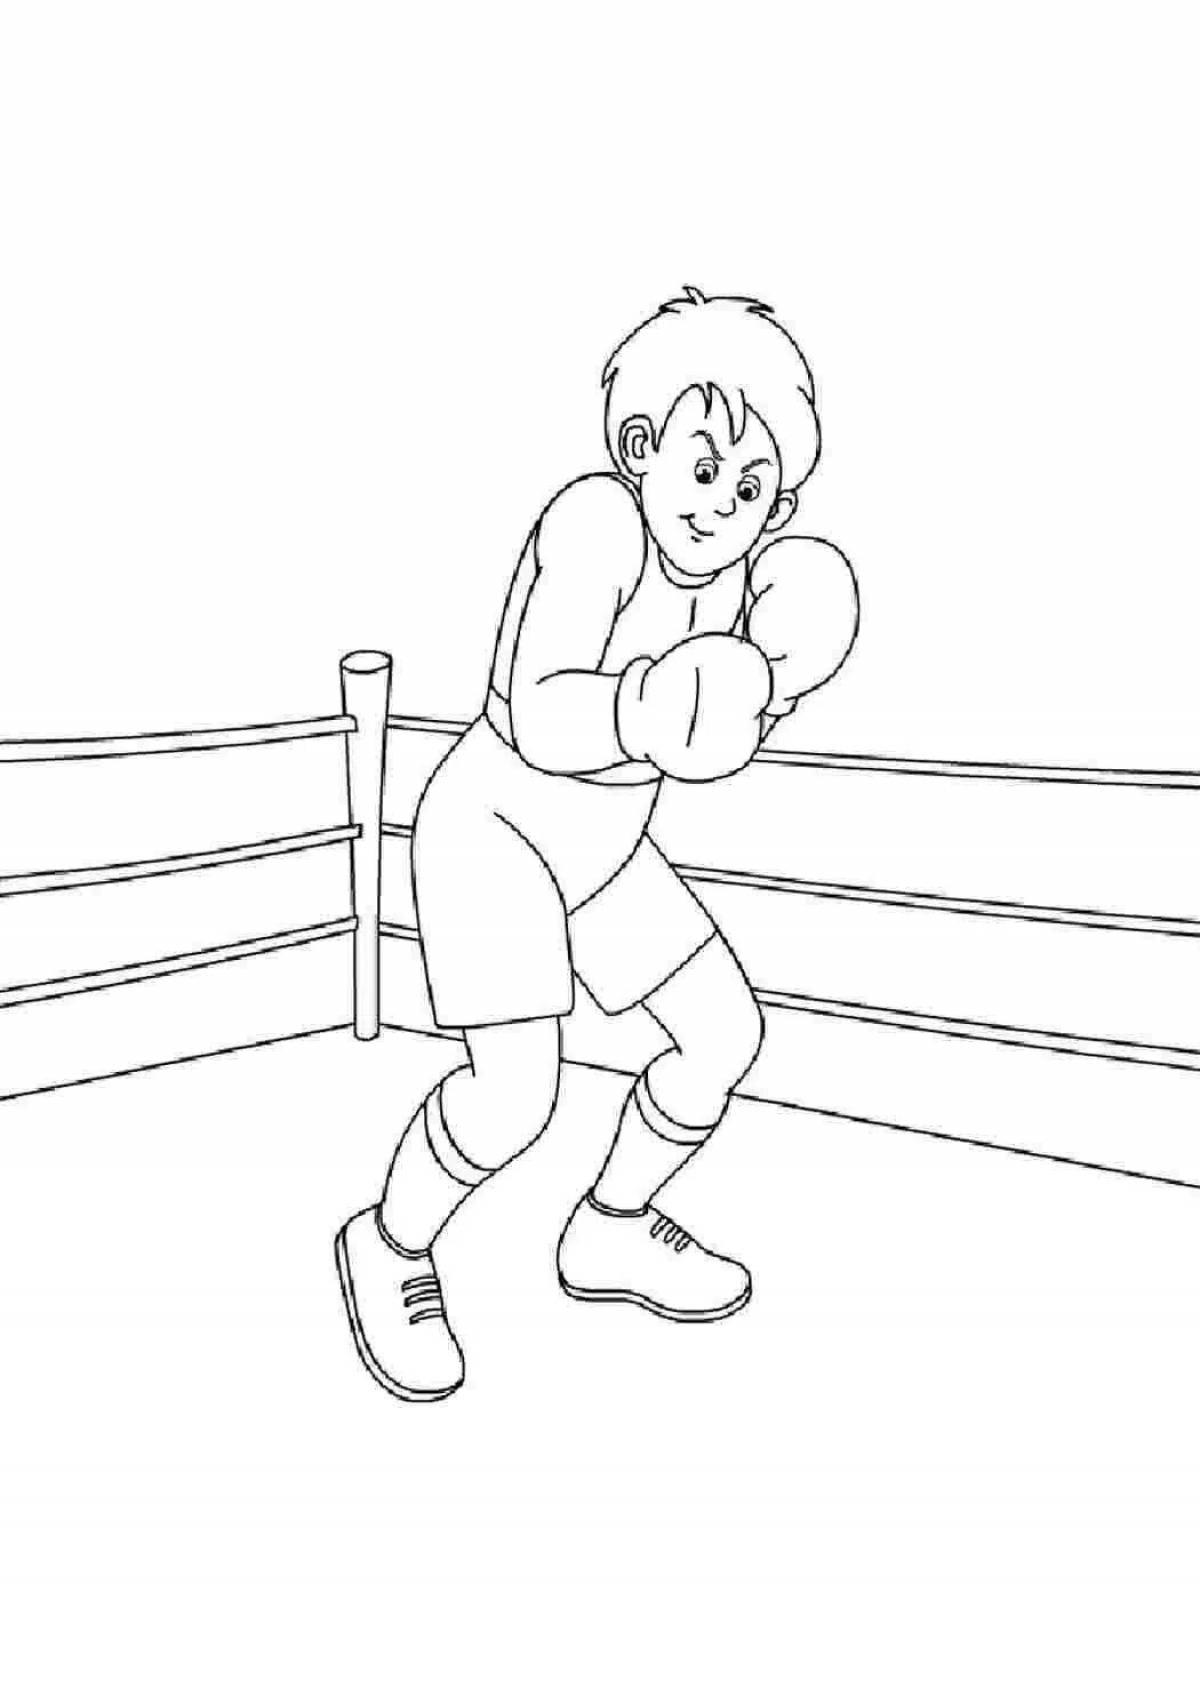 Fun boxing and boo coloring page for kids